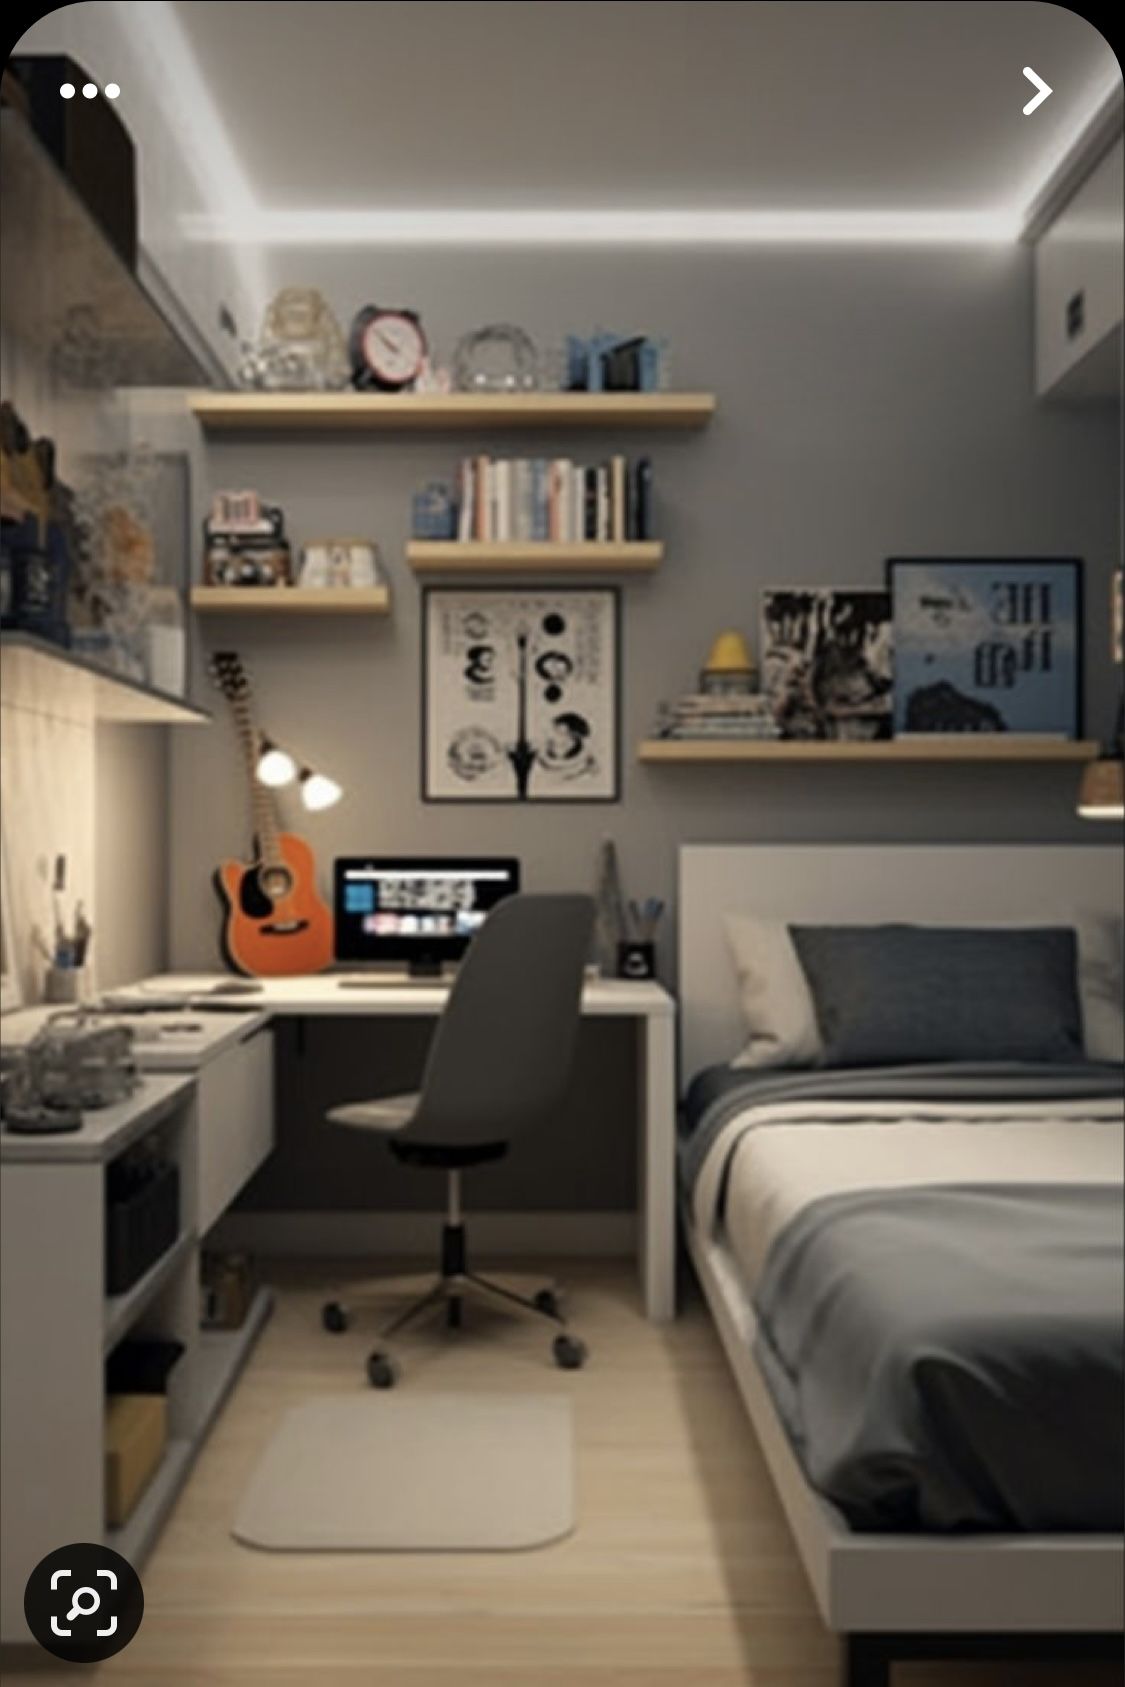 Maximizing Space: Creative Boys Bedroom Ideas for Small Rooms